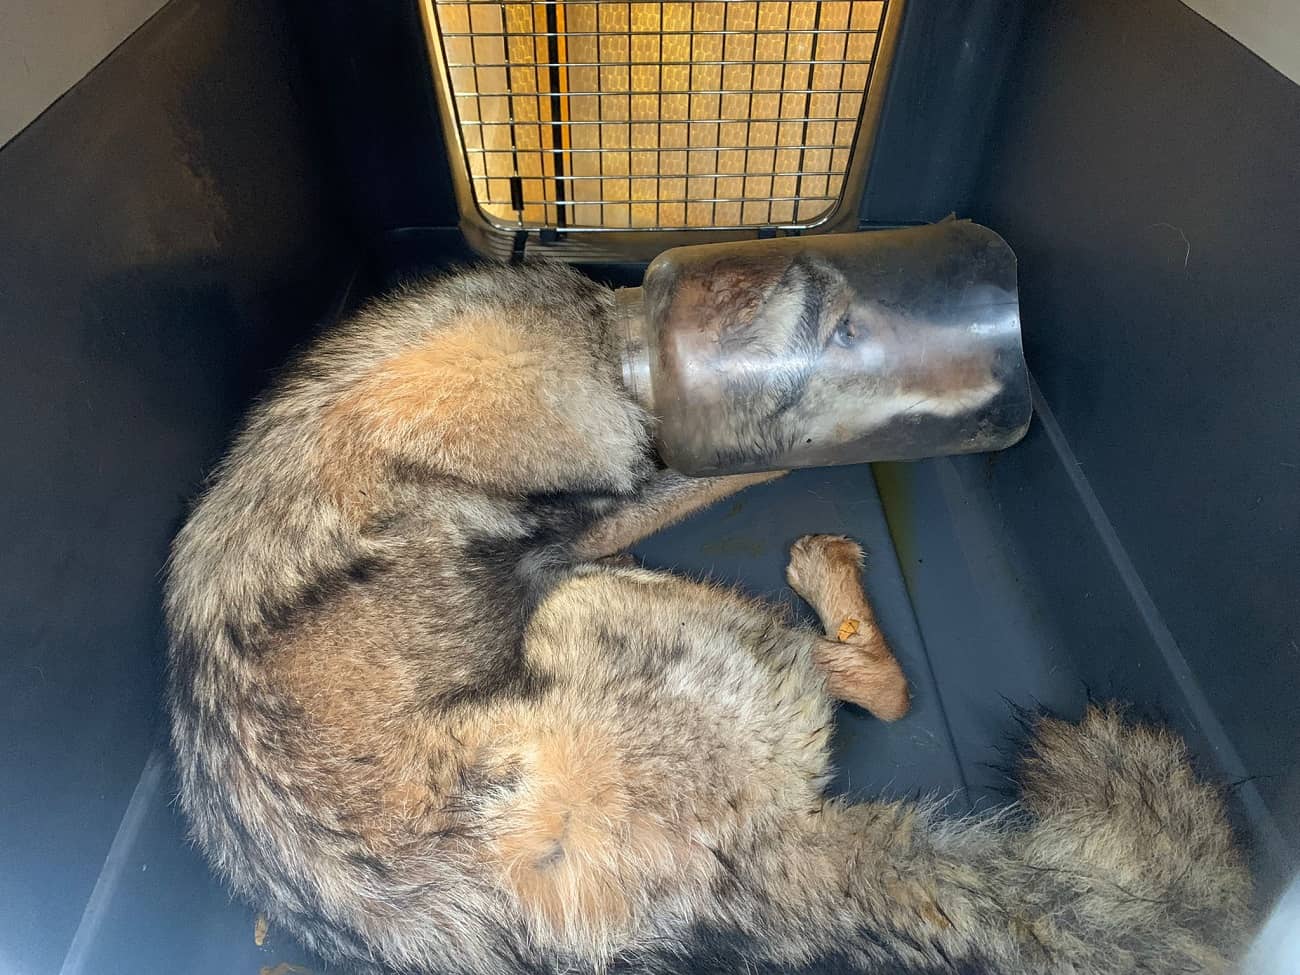 Mississauga coyote rescued